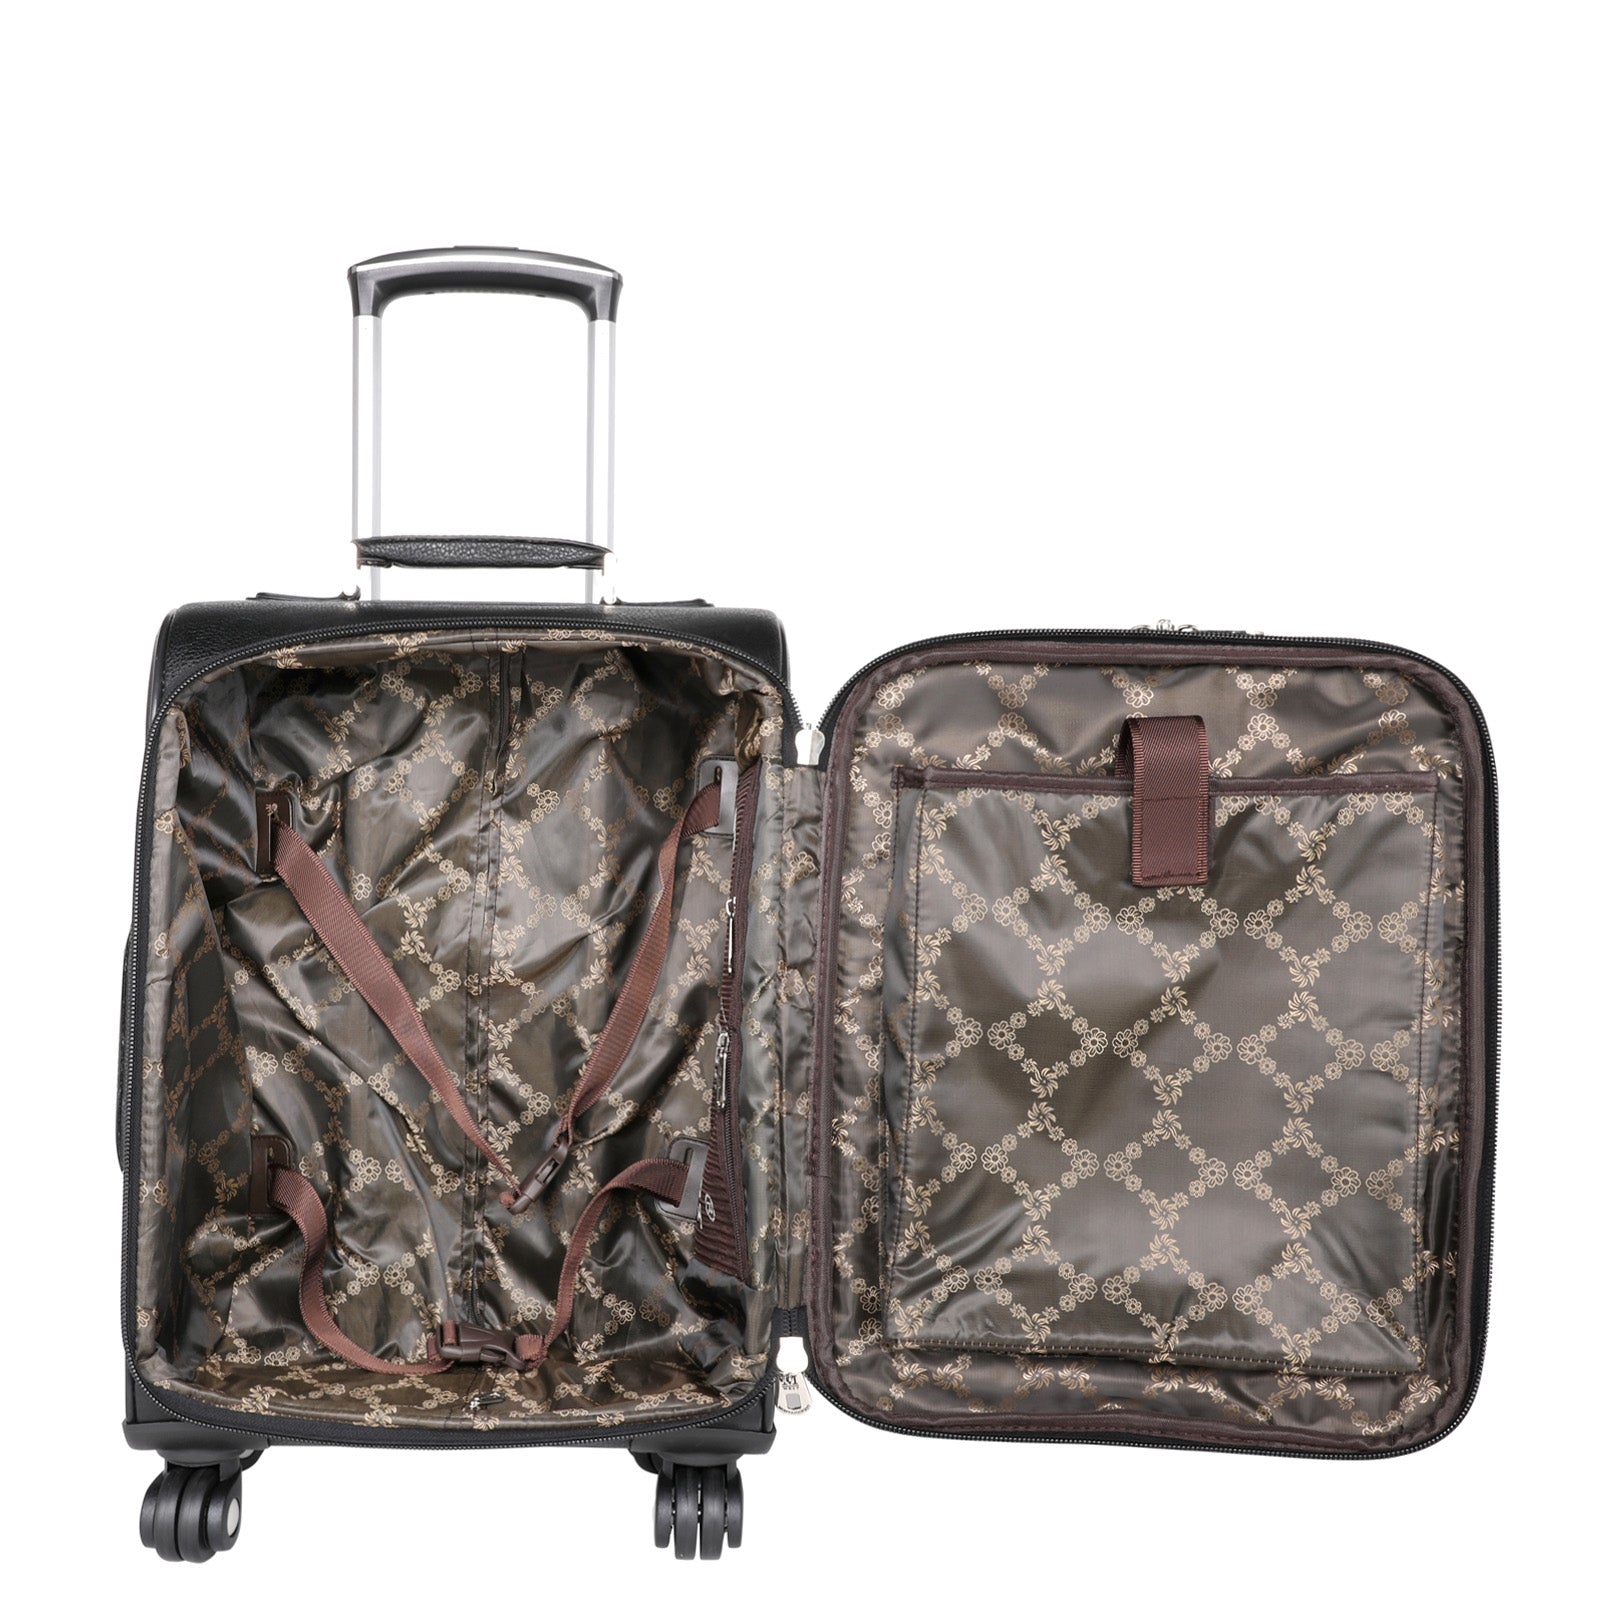 WRL-L1/2/3 Montana West Tooled Leather Collection 3 PC Luggage Set - B